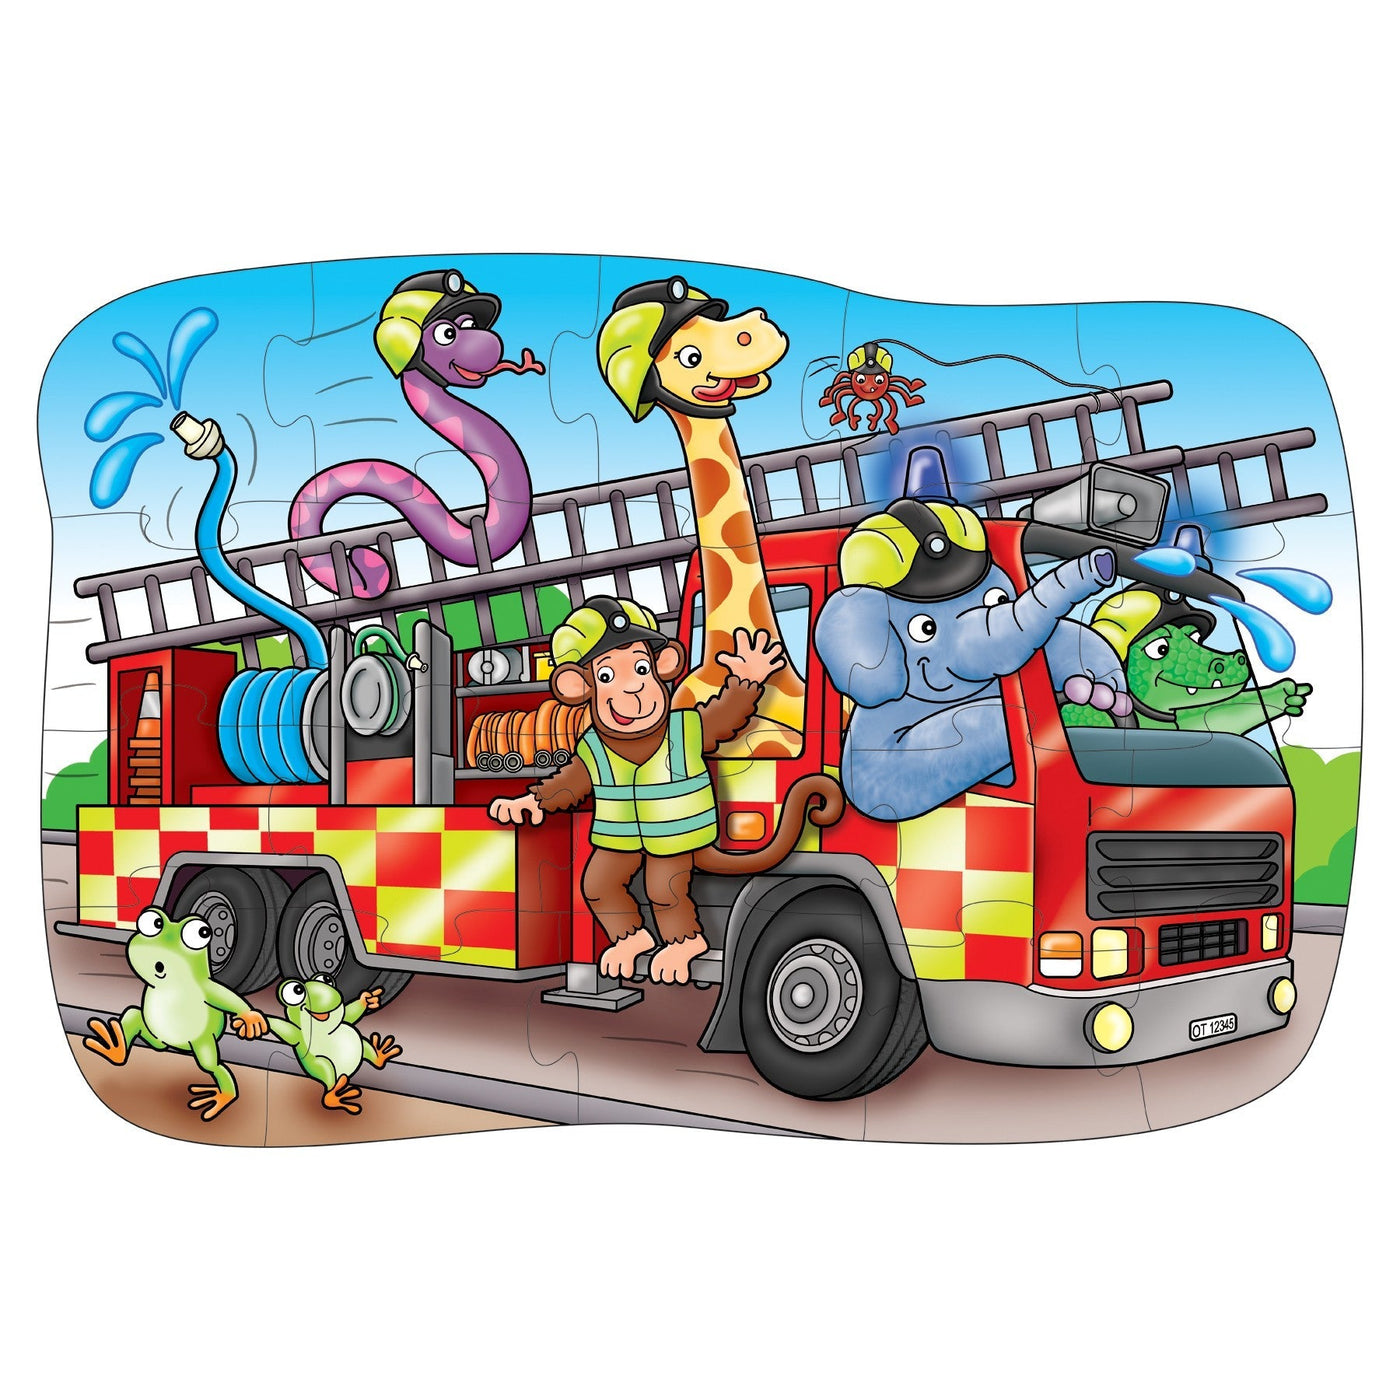 Orchard Toys Big Fire Engine 20 Piece Jigsaw Puzzle